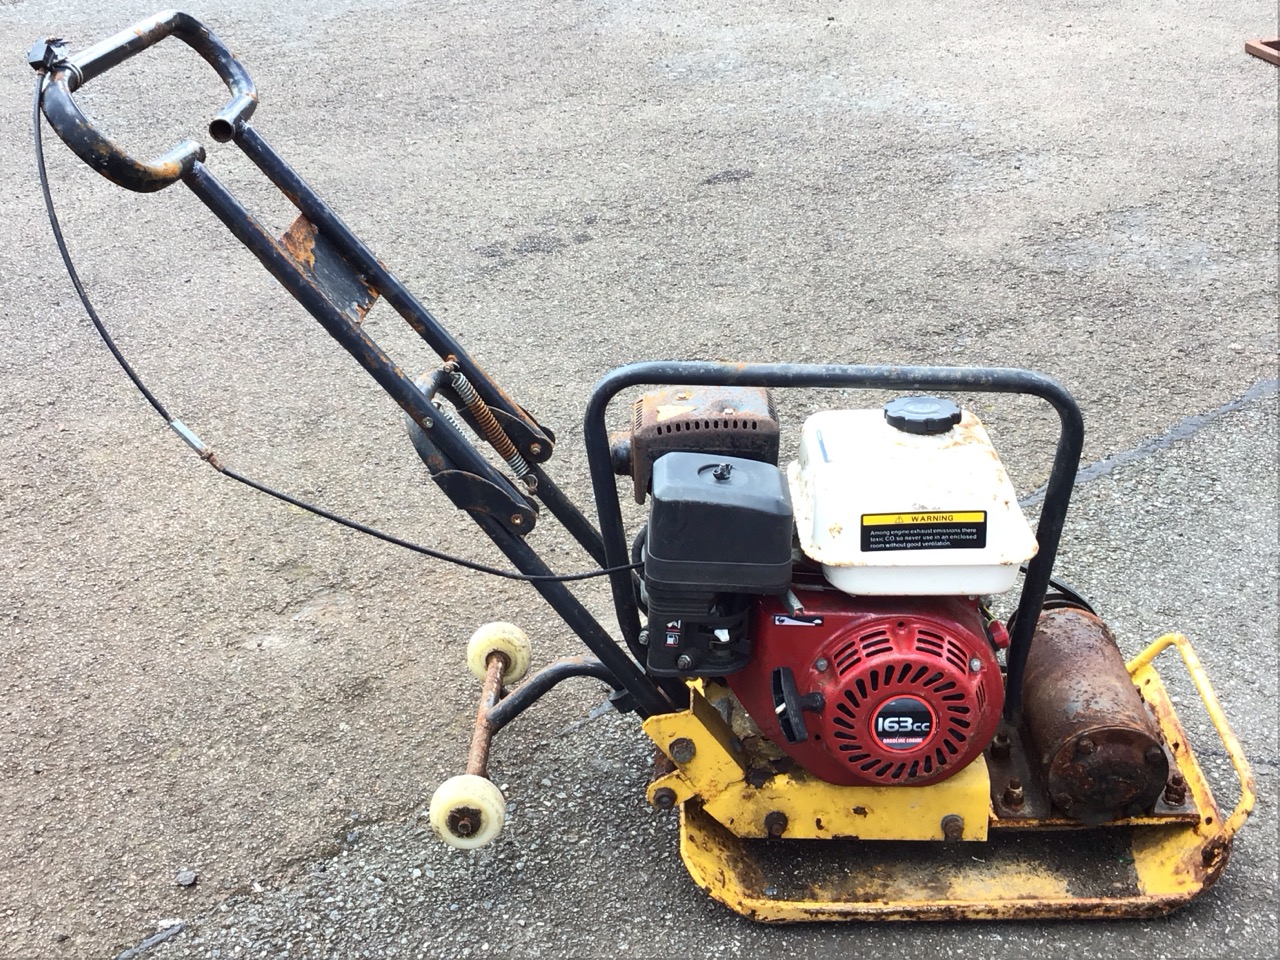 A petrol powered ground wacking machine with trolley wheels and 166cc engine. (A/F)